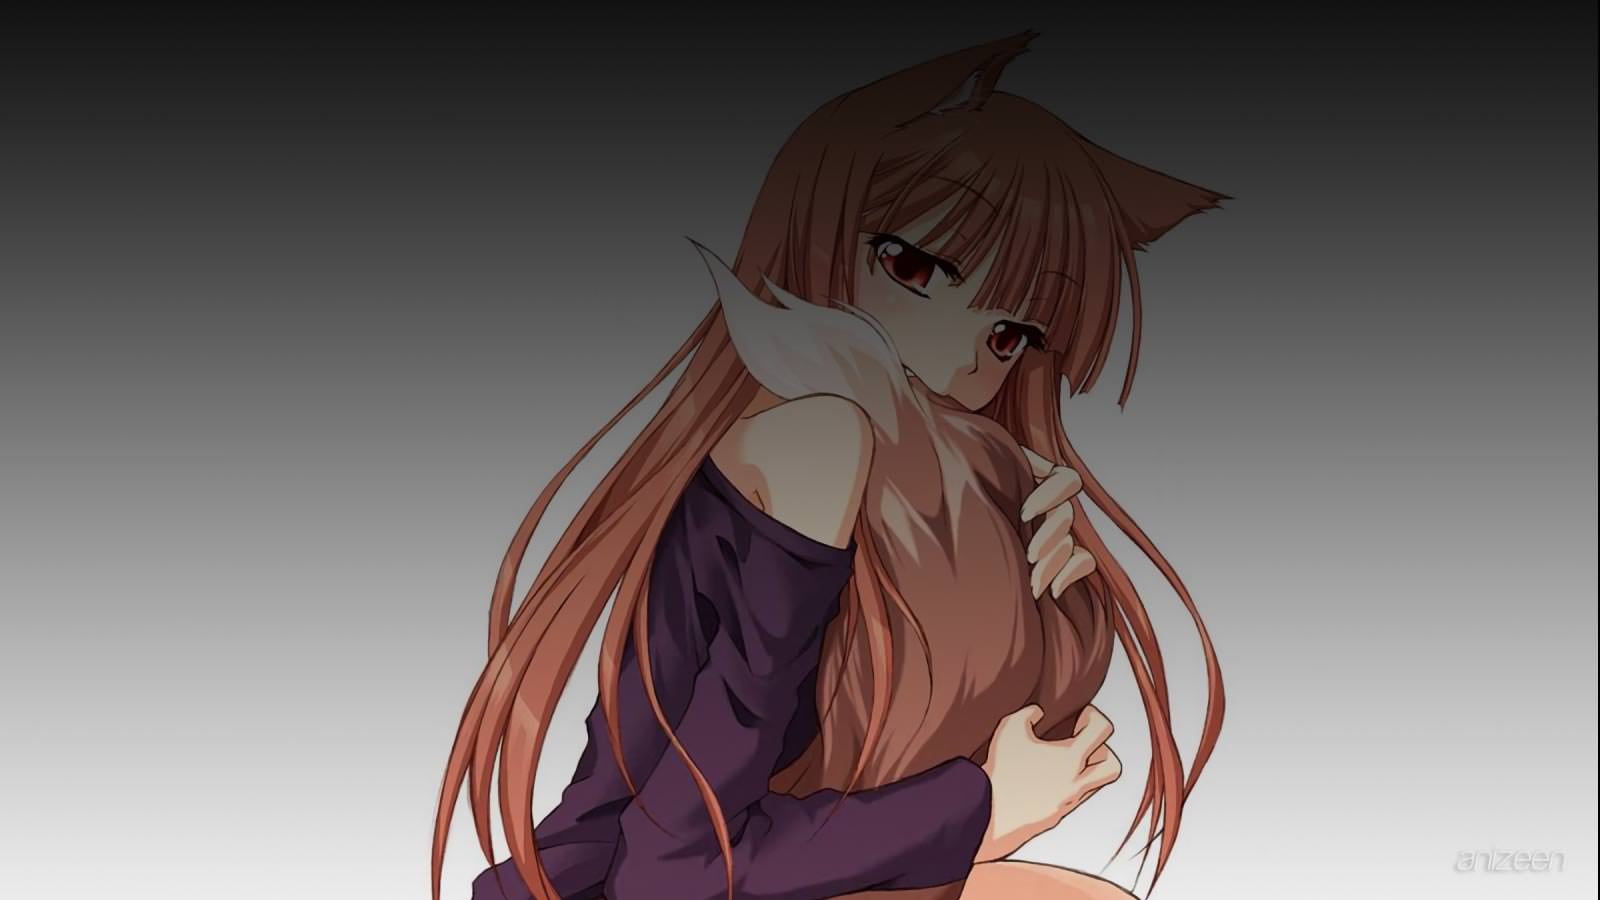 Spice and Wolf anime